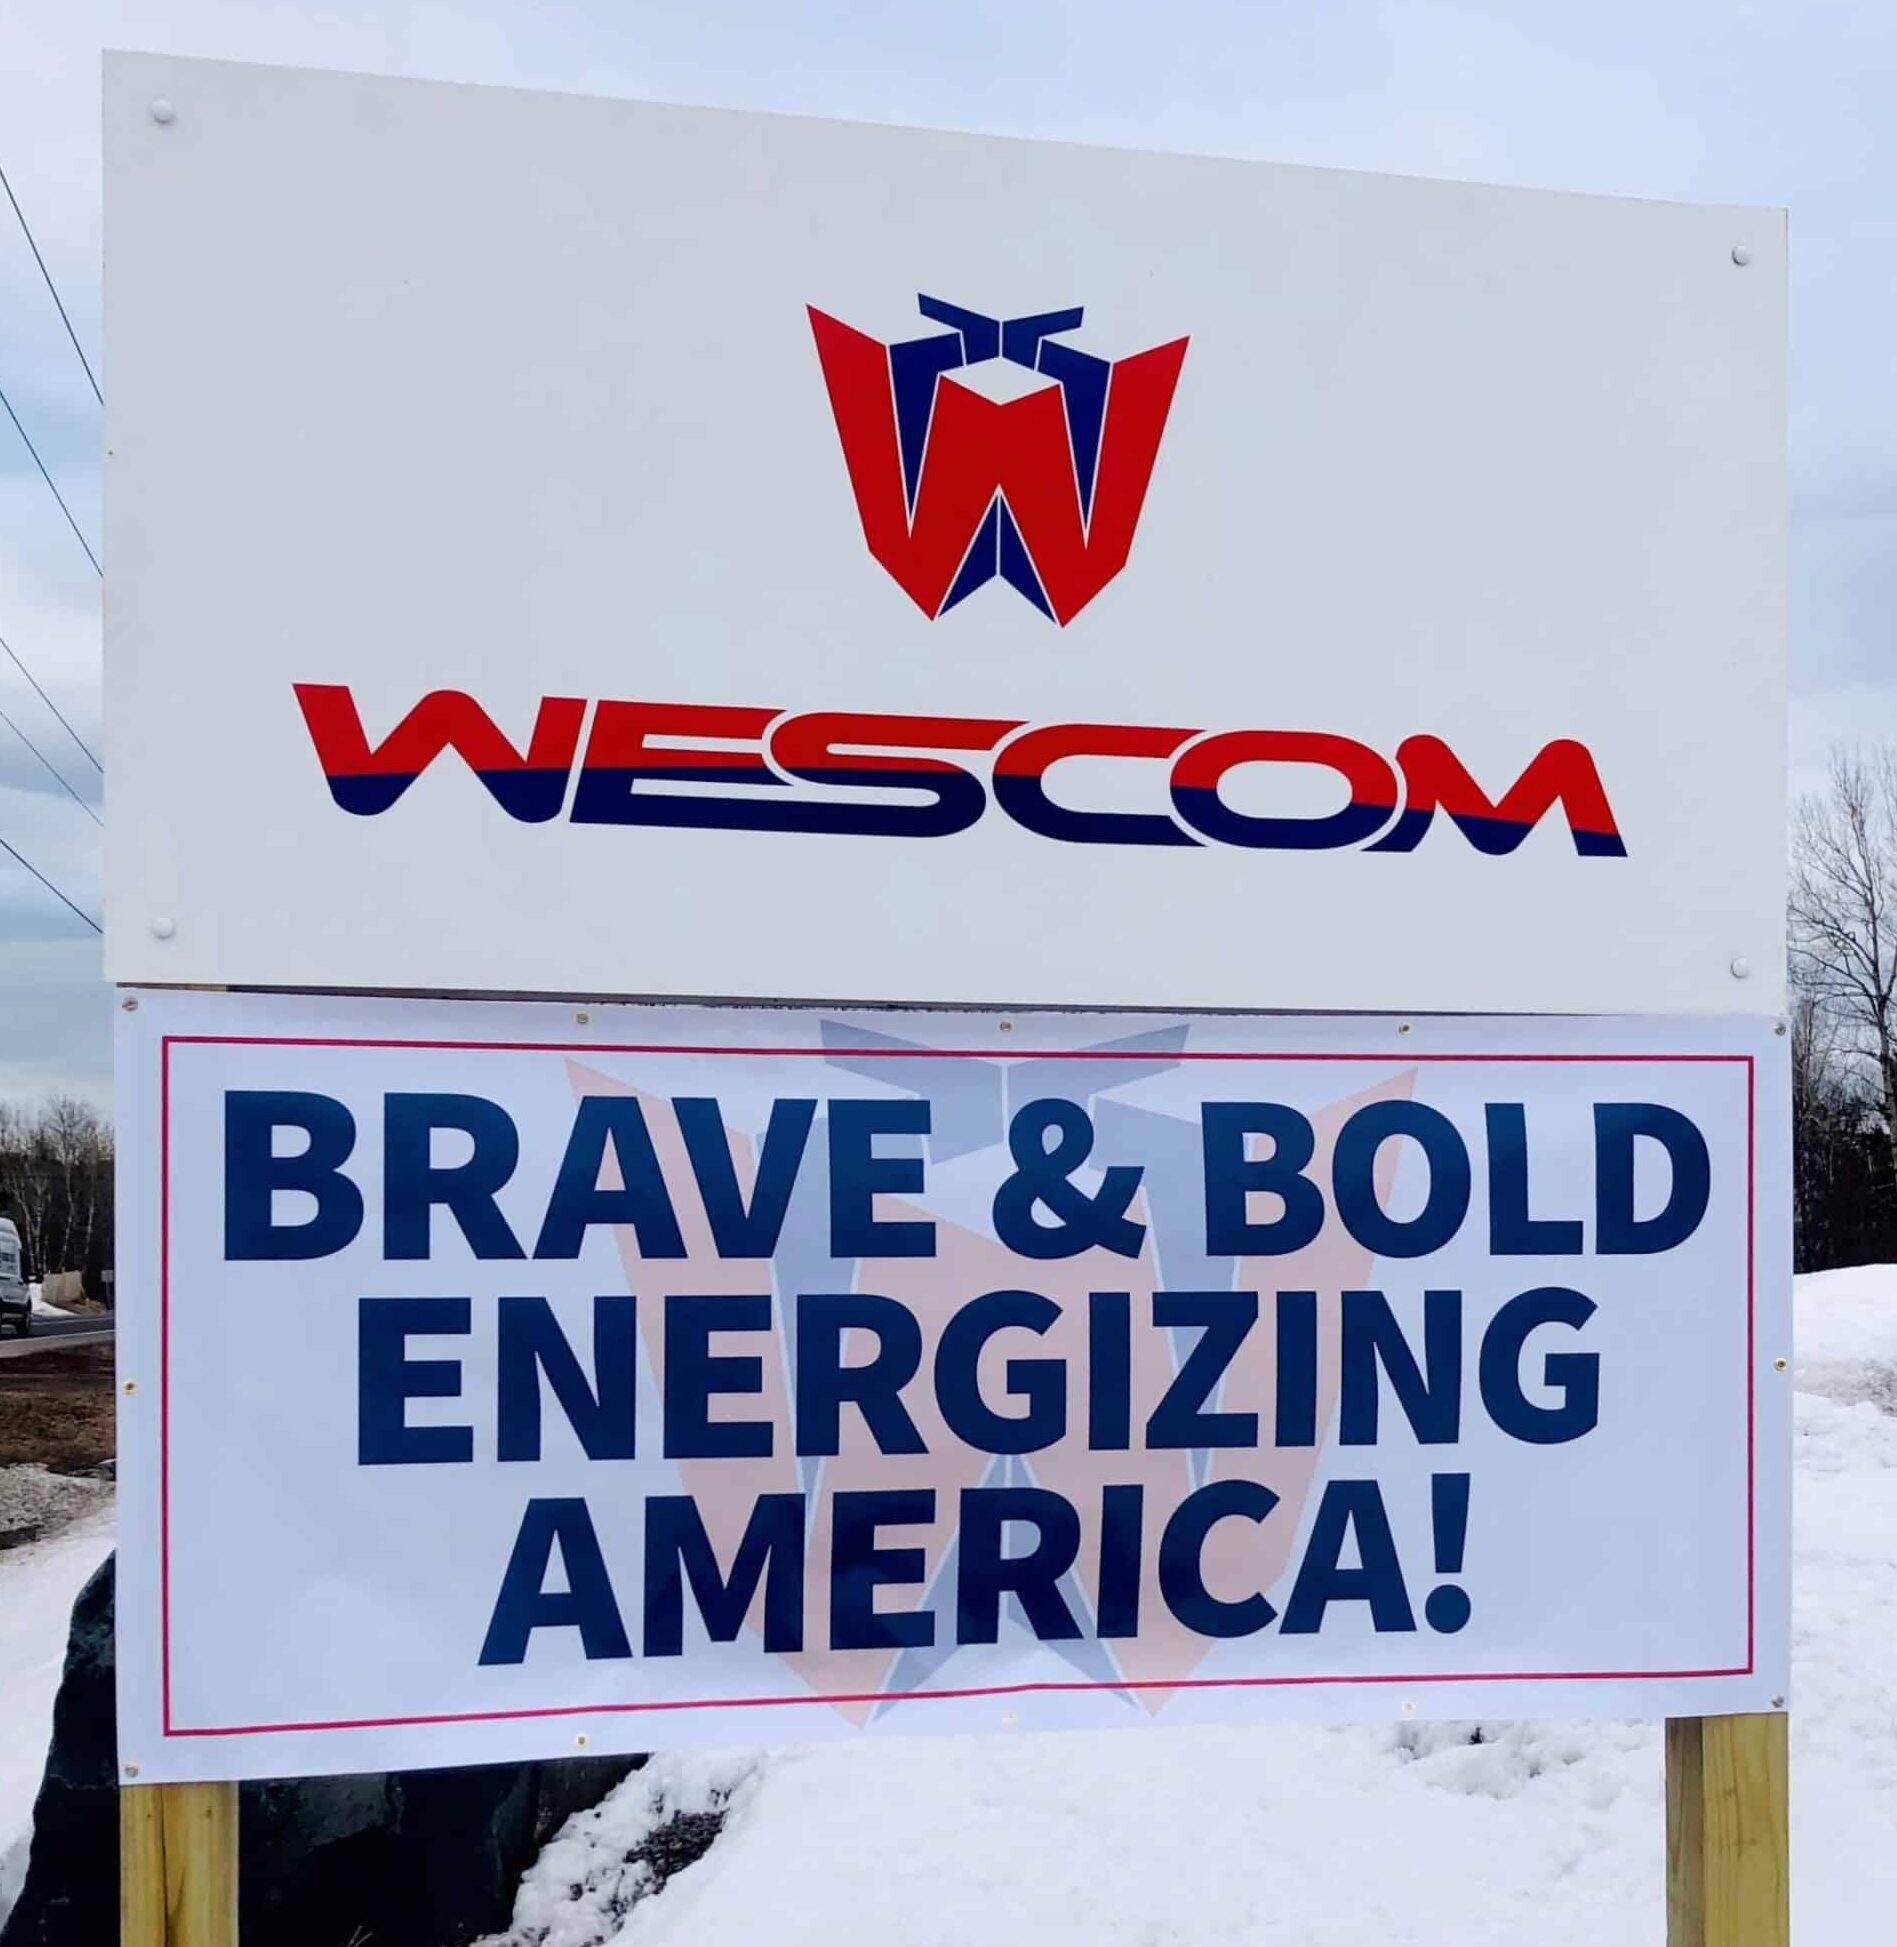 'Wescom Brave & Bold Energizing America' sign outside jobsite in snow